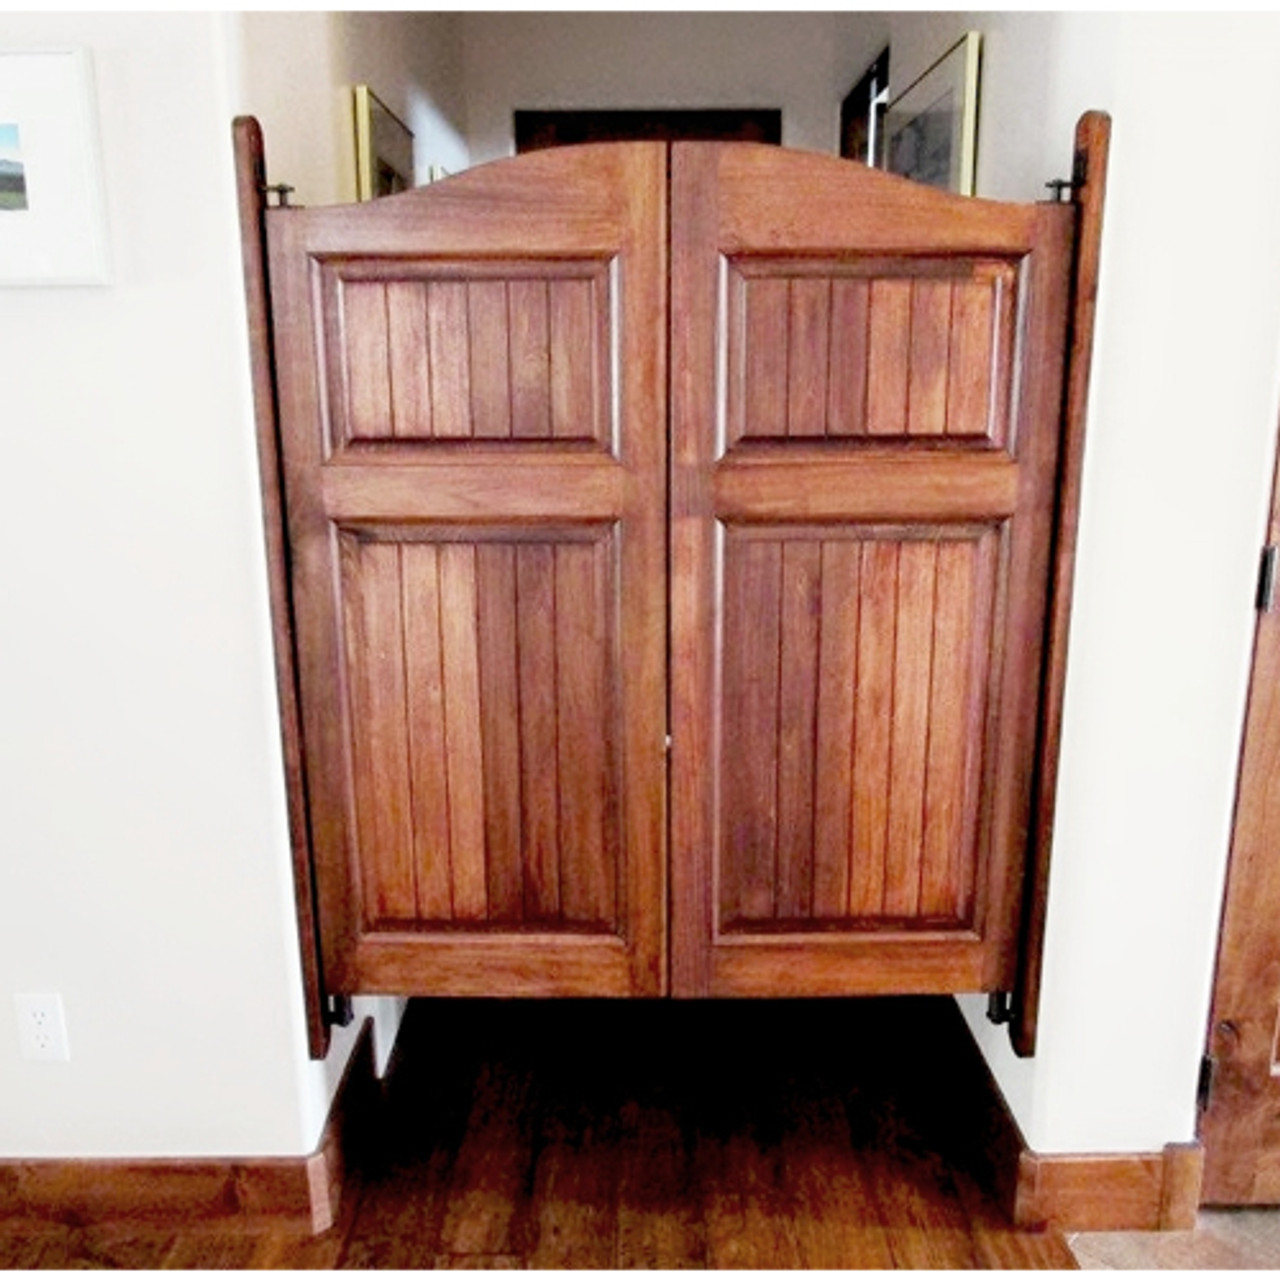 How to Install Saloon or Cafe Doors